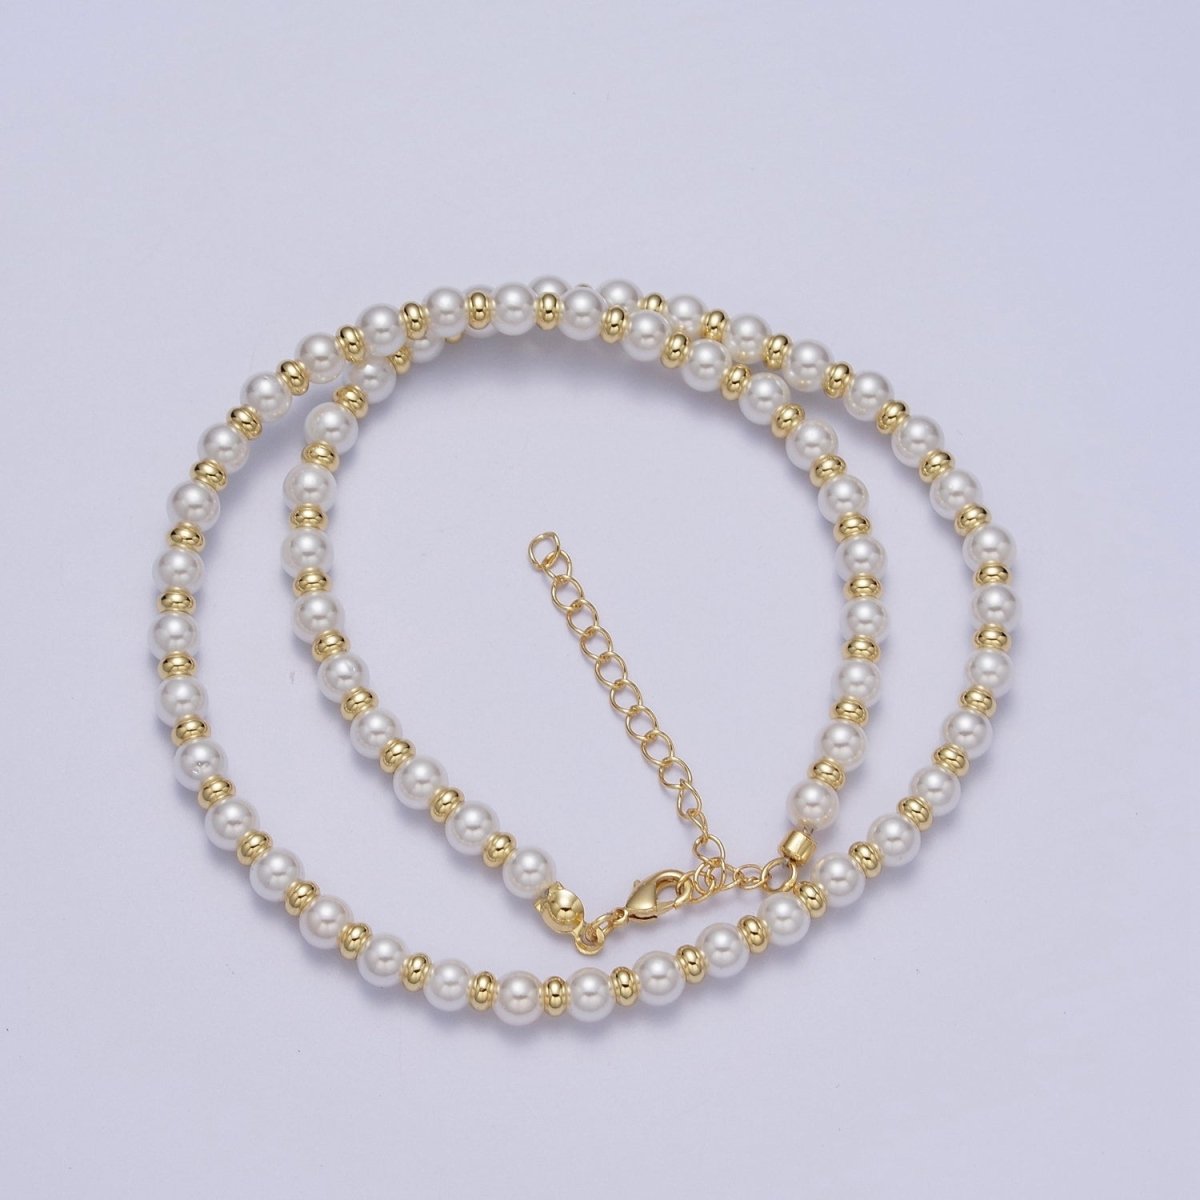 3mm, 4mm, 5mm, 6mm Round White Shell Pearl Beaded Spacer 16 Inch Gold Filled Choker Necklace | WA-1277 - WA-1280 Clearance Pricing - DLUXCA